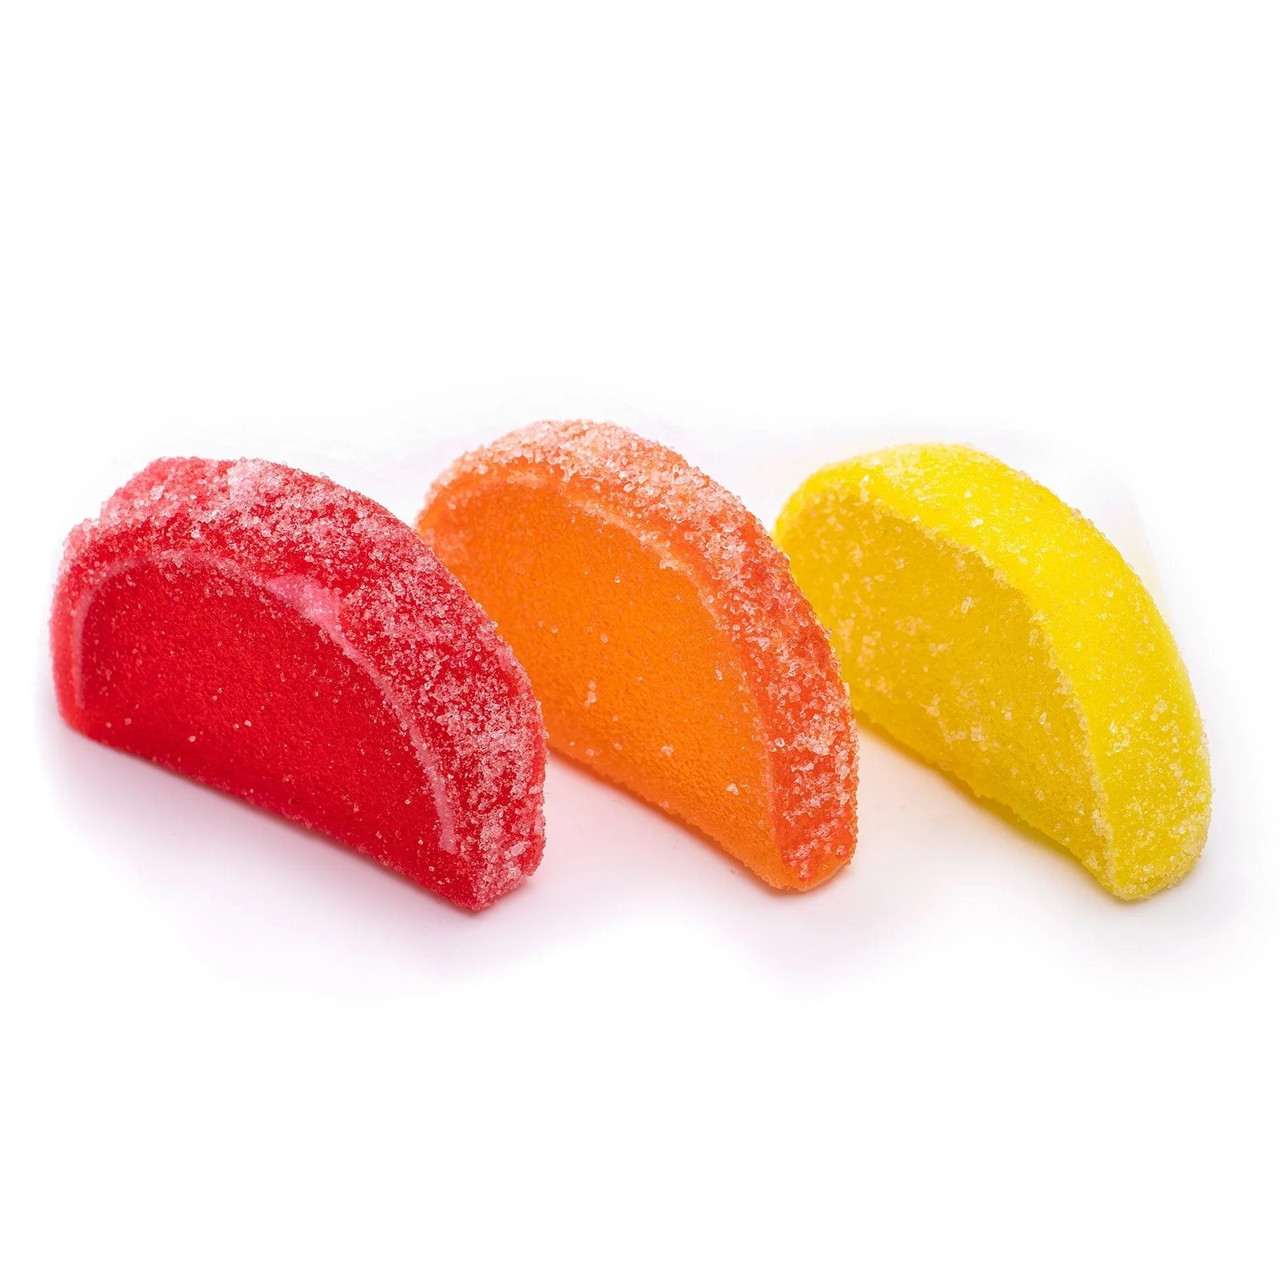 Signature SELECT Candy Fruit Slices - 10 Oz